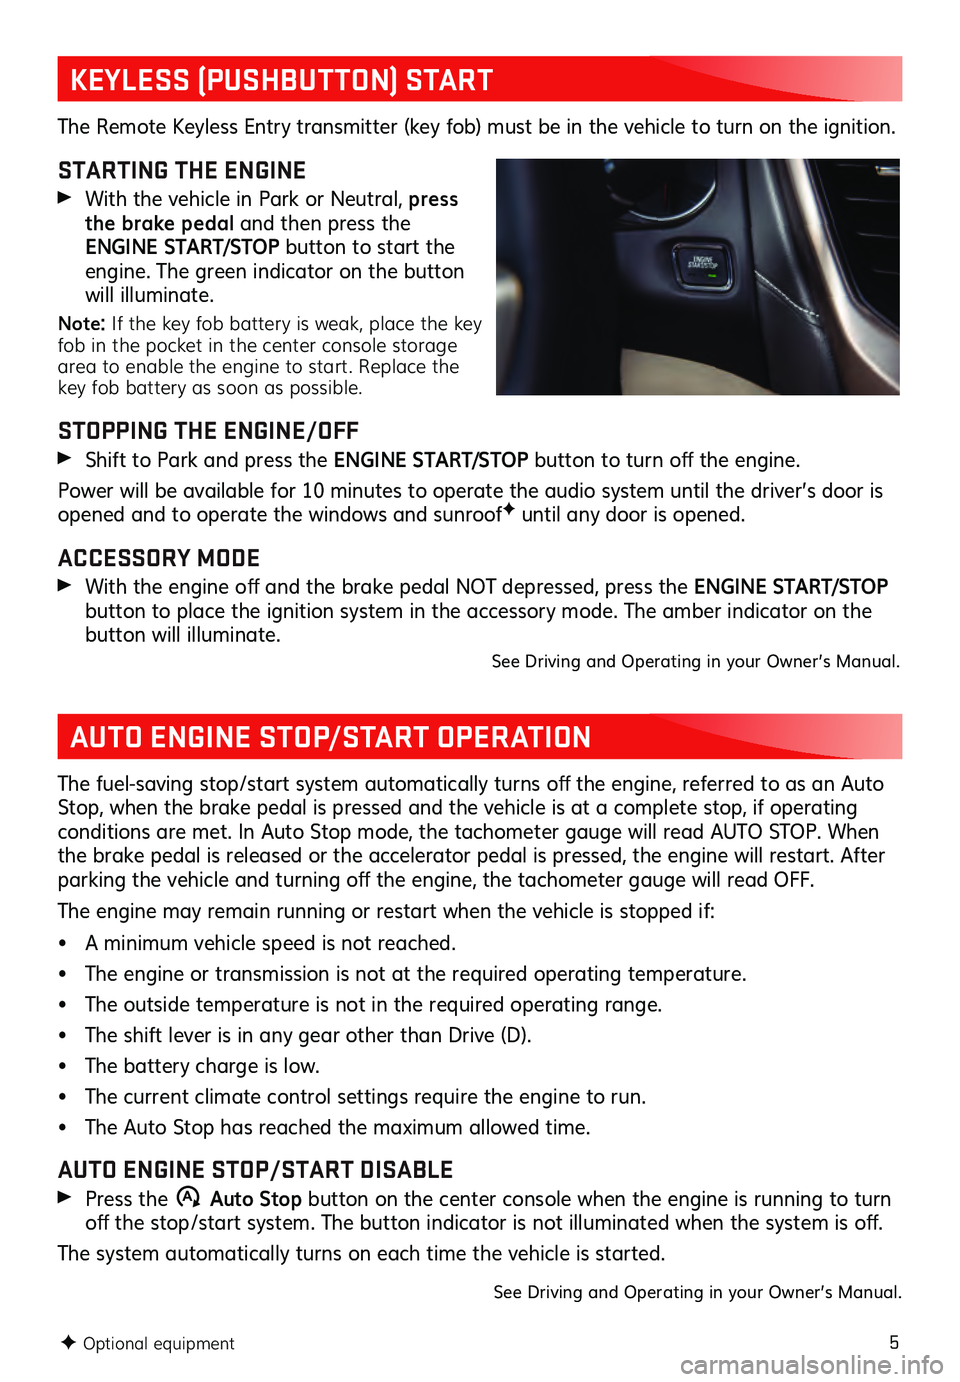 GMC ACADIA 2021  Get To Know Guide 5
KEYLESS (PUSHBUTTON) START
AUTO ENGINE STOP/START OPERATION
The Remote Keyless Entry transmitter (key fob) must be in the vehicle to turn on the ignition. 
STARTING THE ENGINE 
 With the vehicle in 